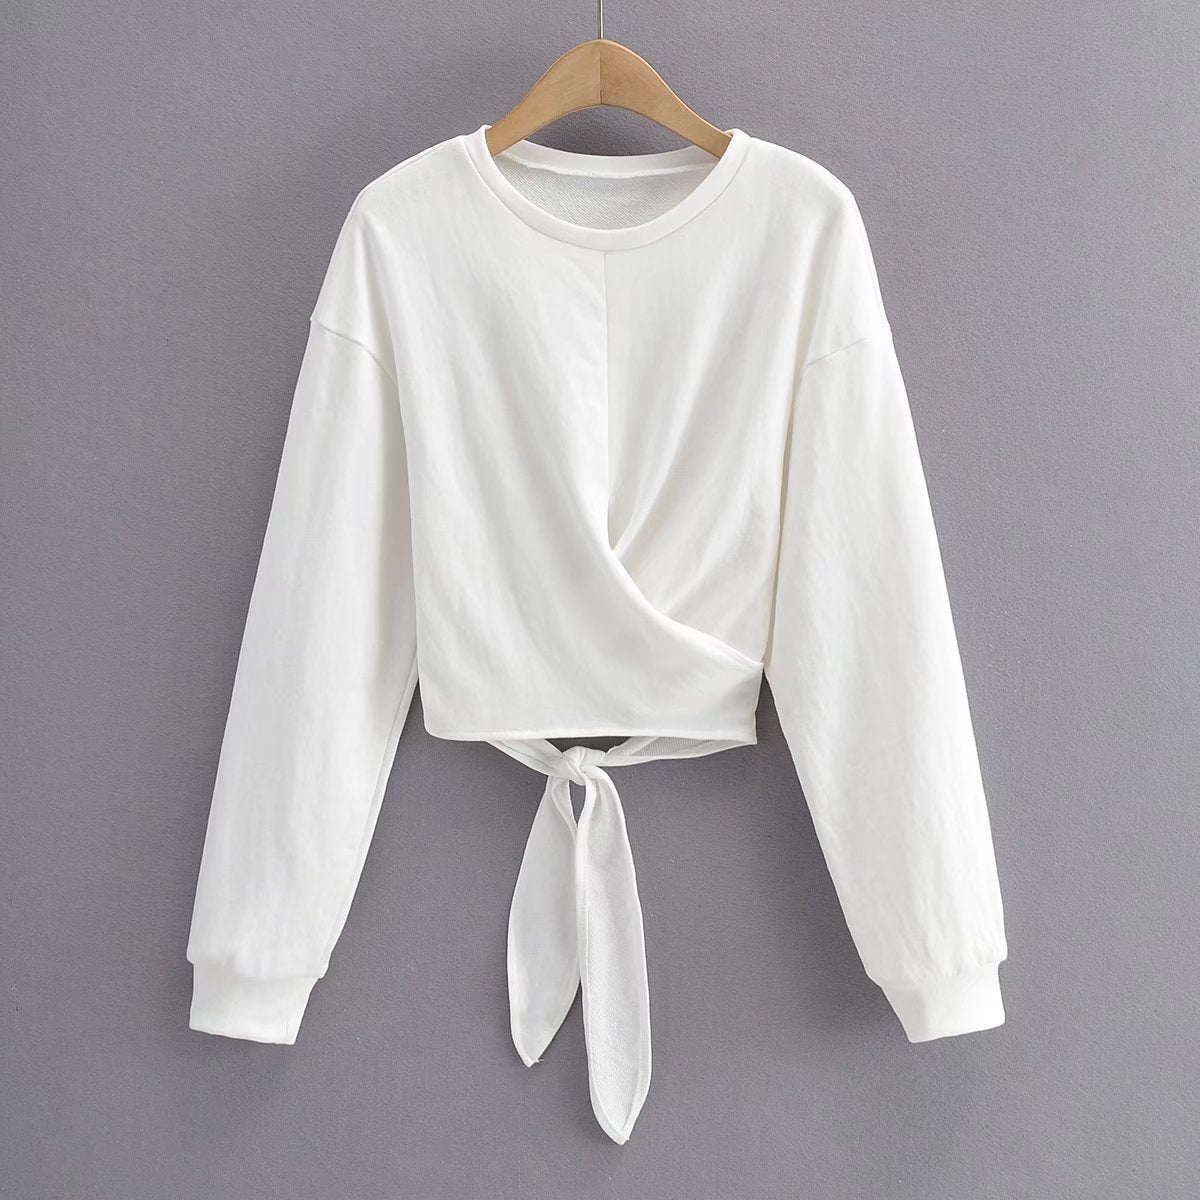 Cotton Heavy Comfortable Cropped Sexy Hip Hop Criss Cross Strap Round Neck Bowknot Campus Sweater